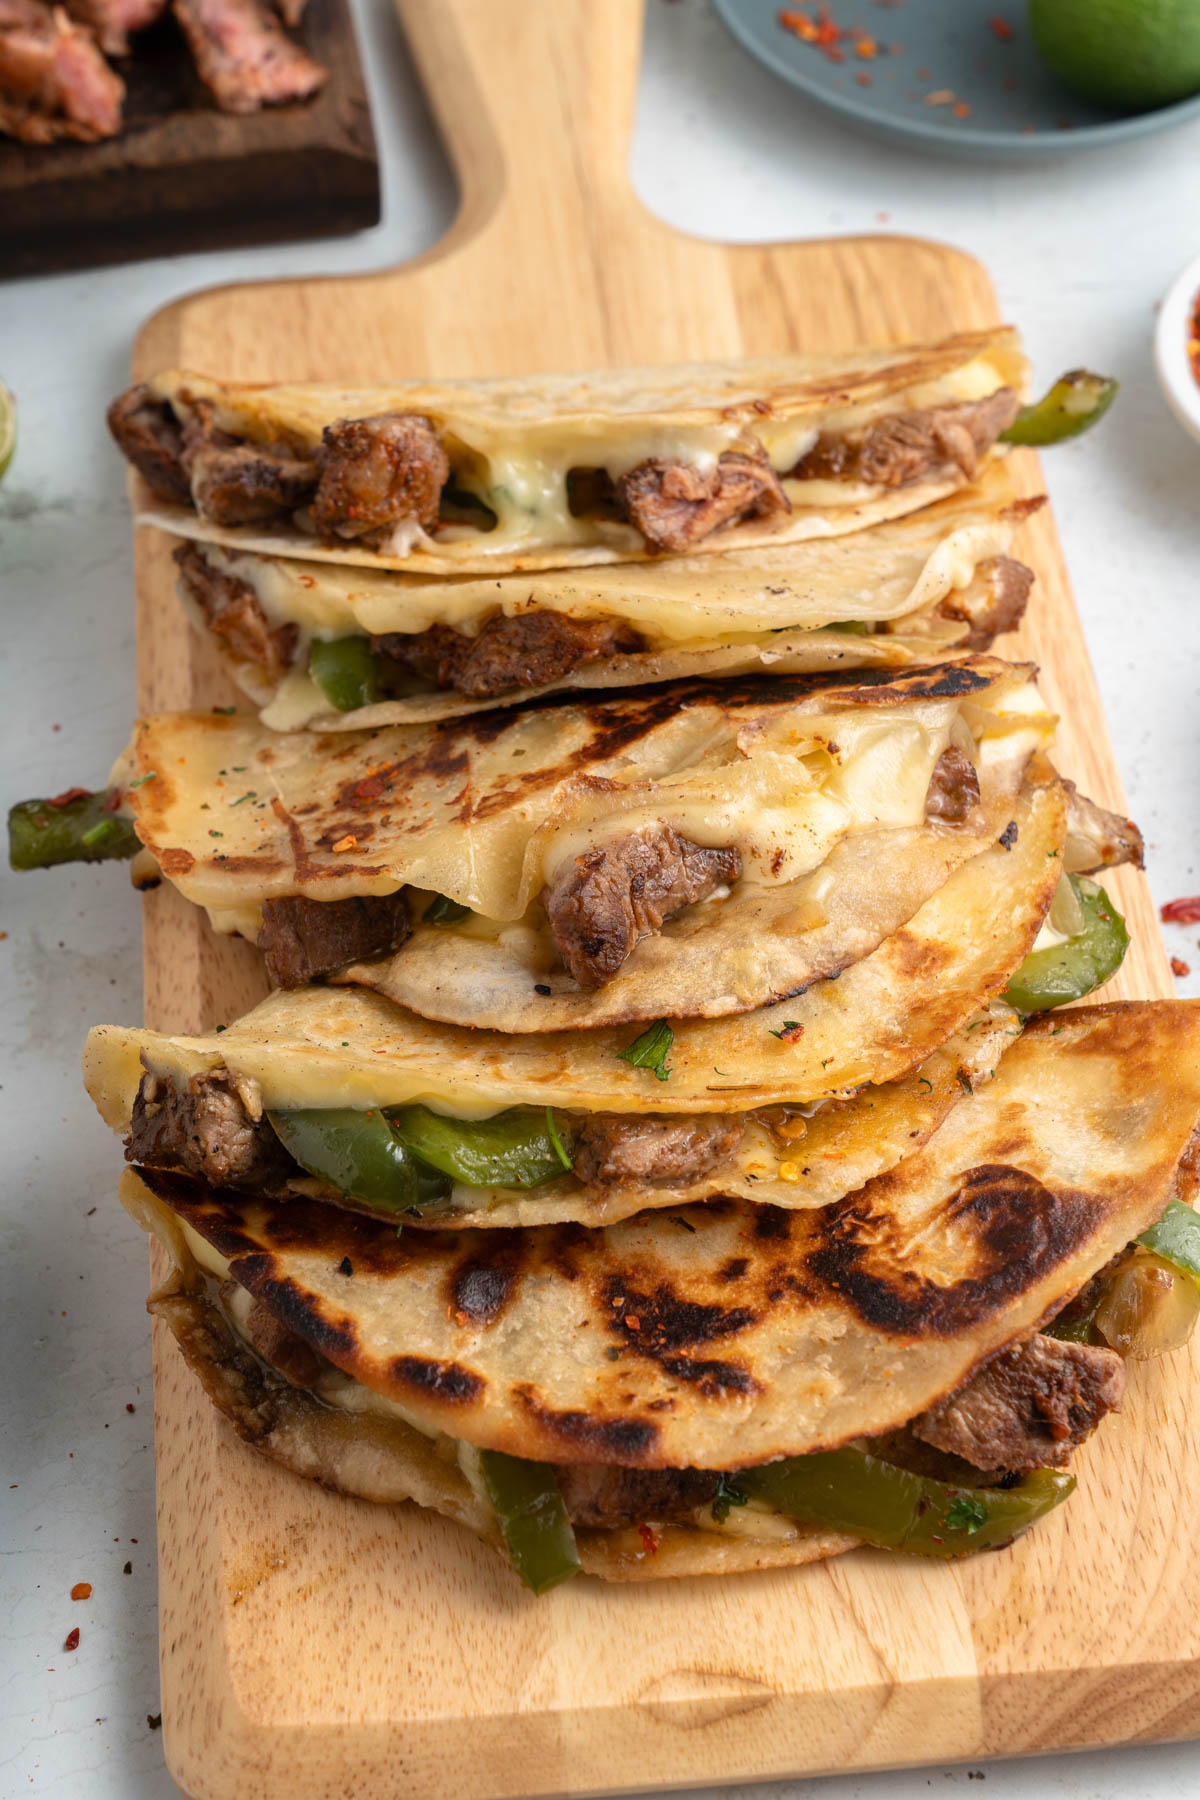 A stack of quesadillas on a wooden cutting board.